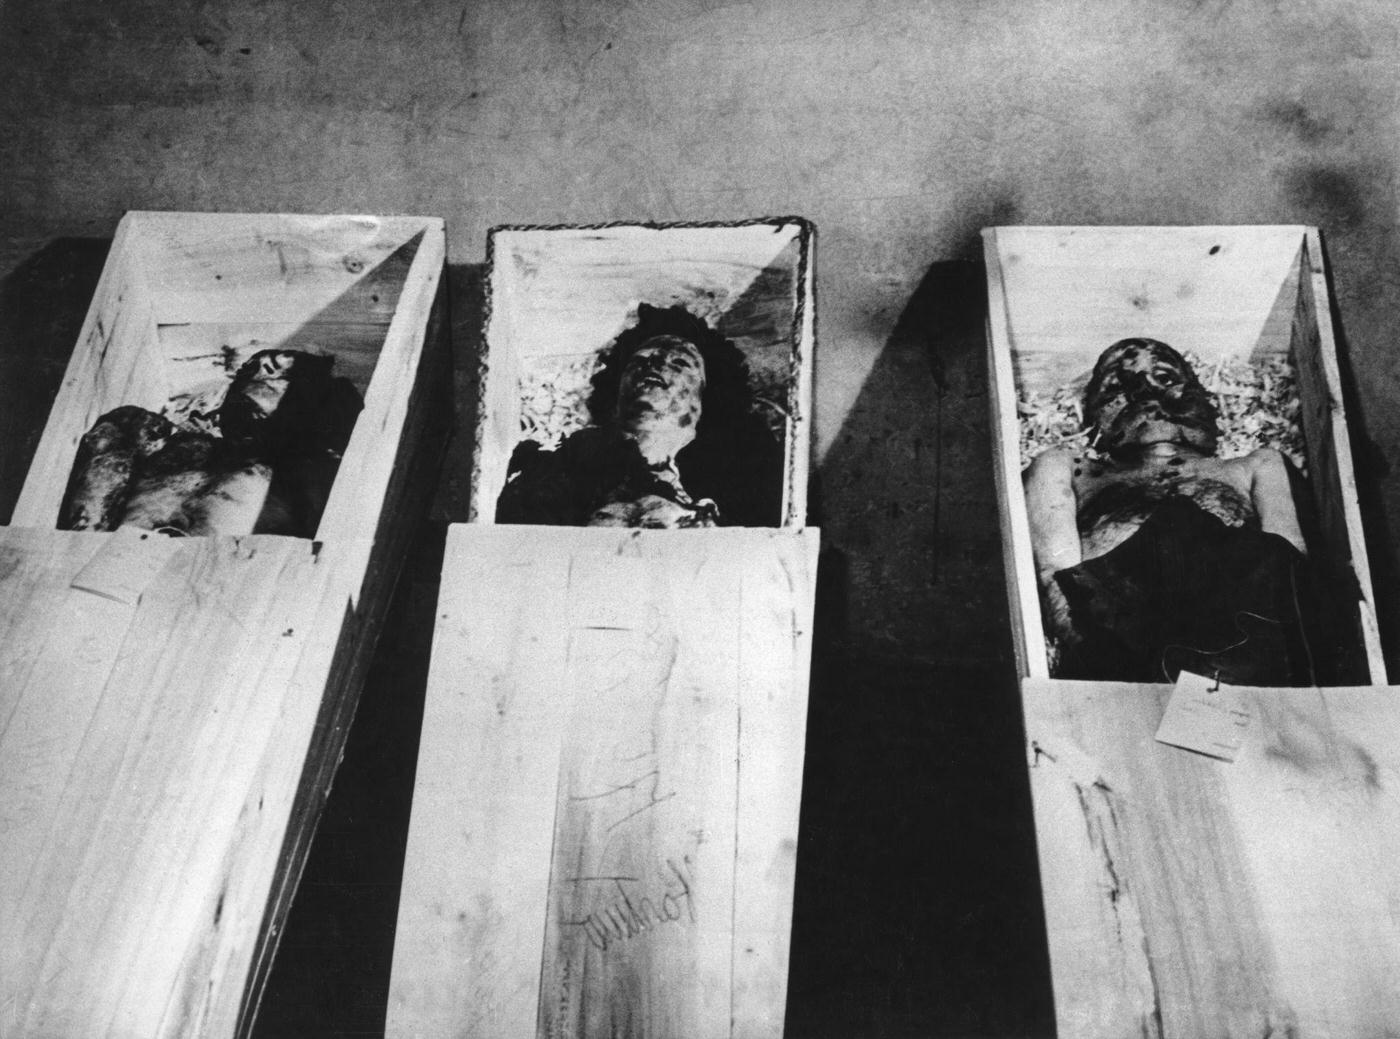 Corpses of Mussolini and Clara Petacci Displayed in Milan, 1945